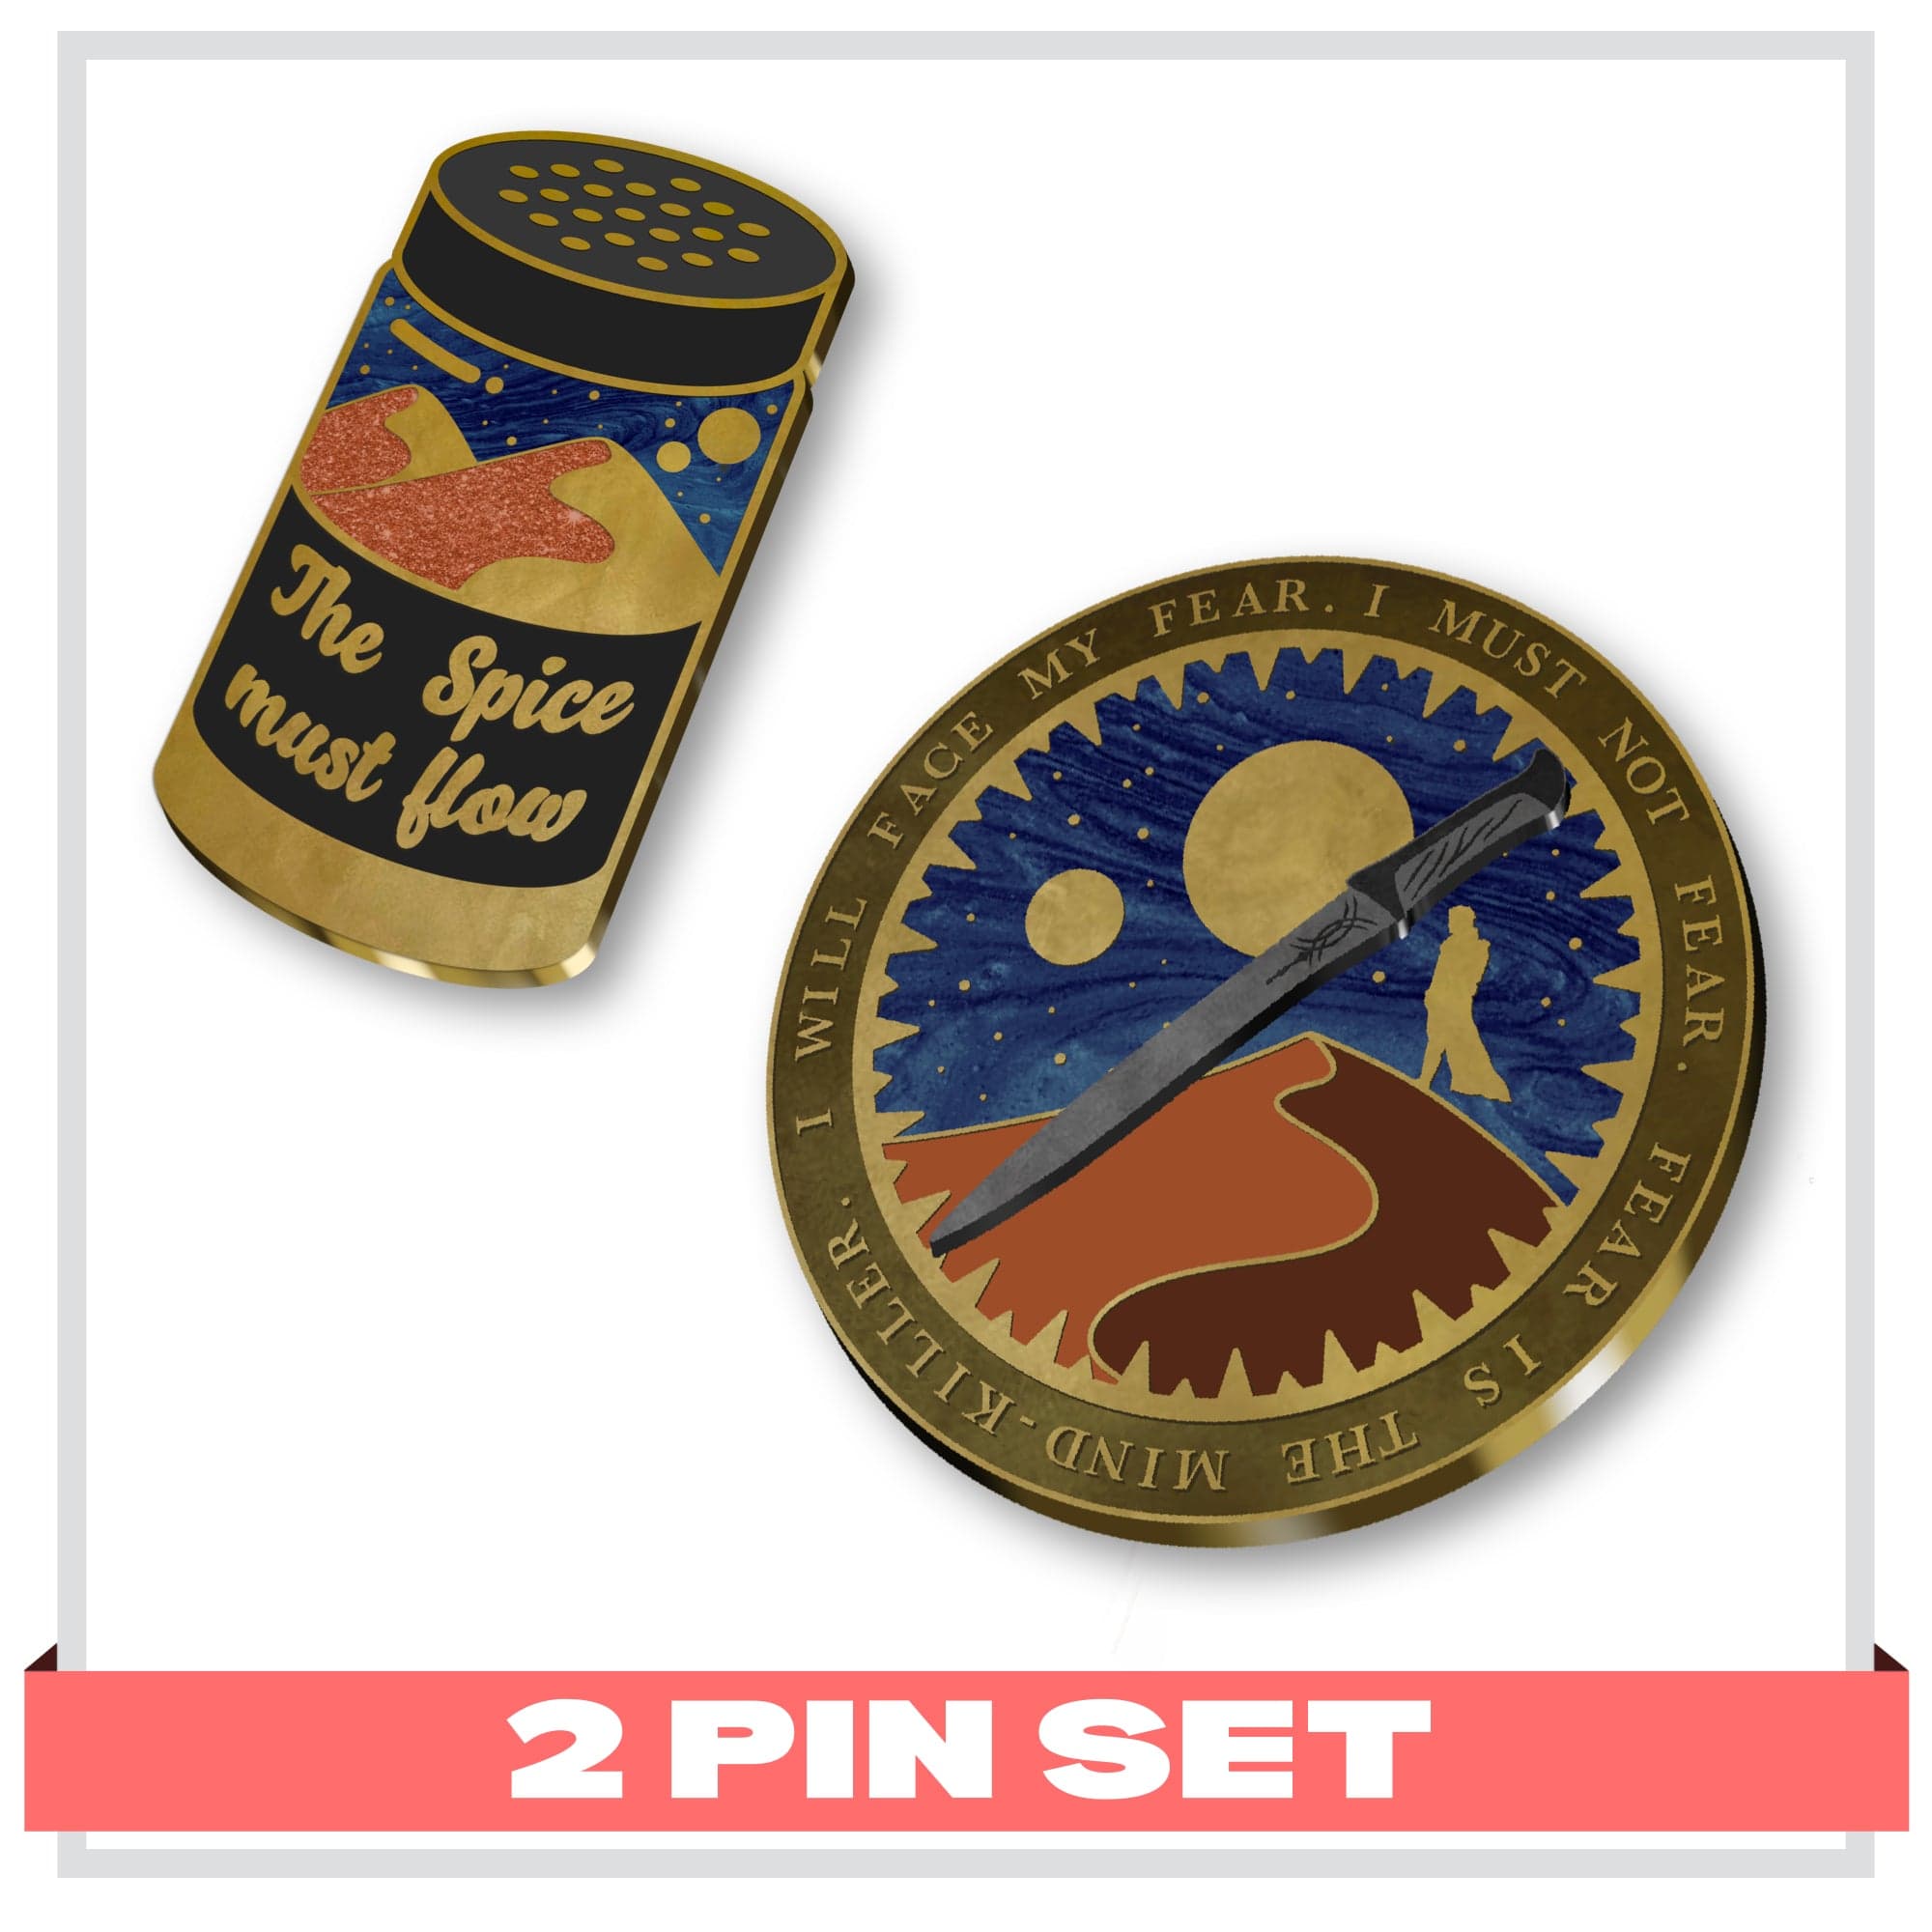 pinbuds Space Spice 2 pin set Dune Fear Quote Spinner Pin